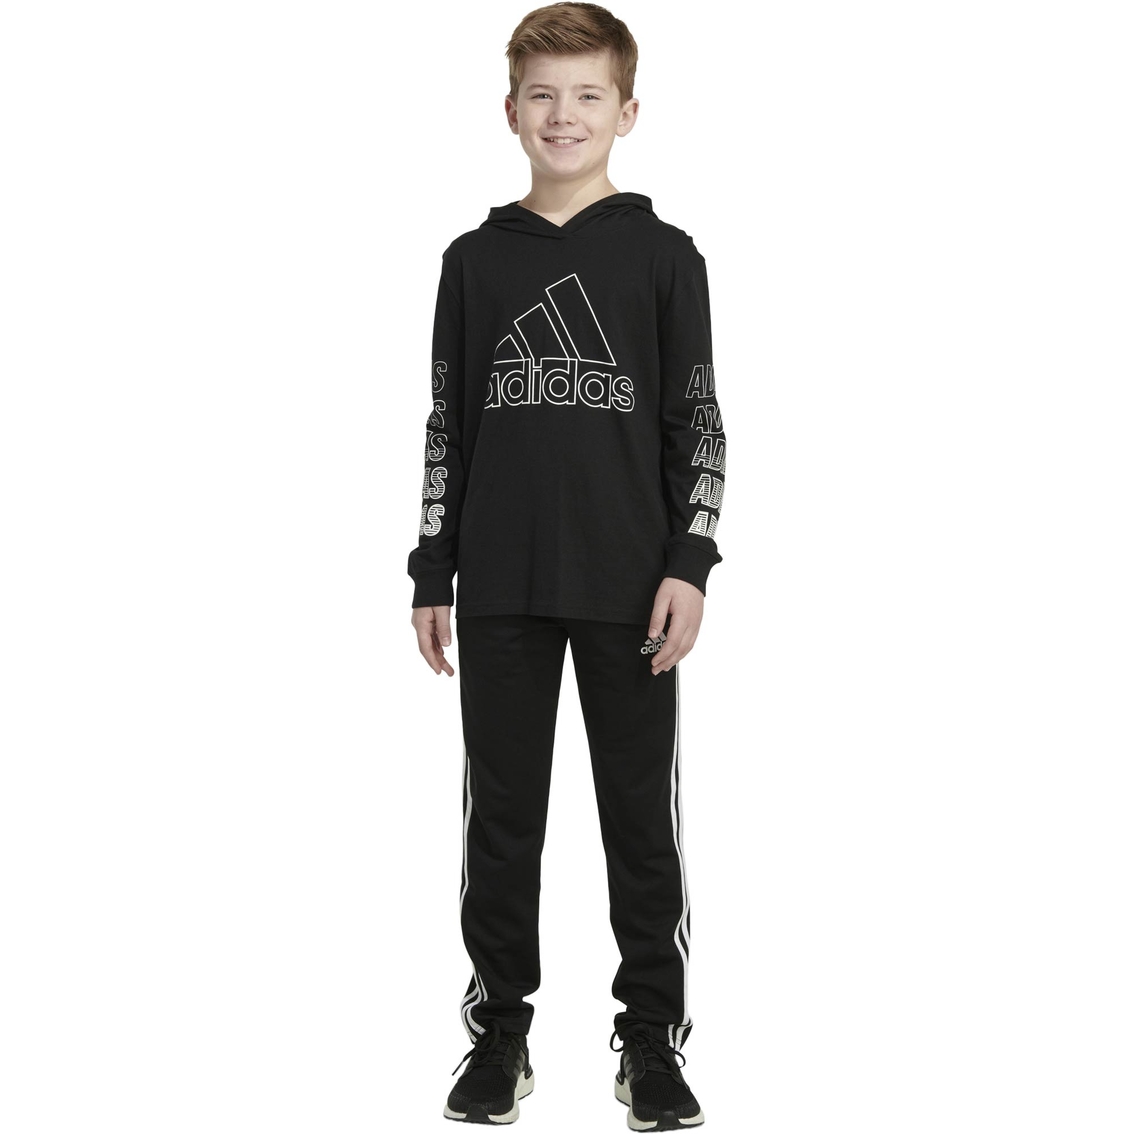 Adidas Toddler Boys Fast Hooded Tee - Image 1 of 7